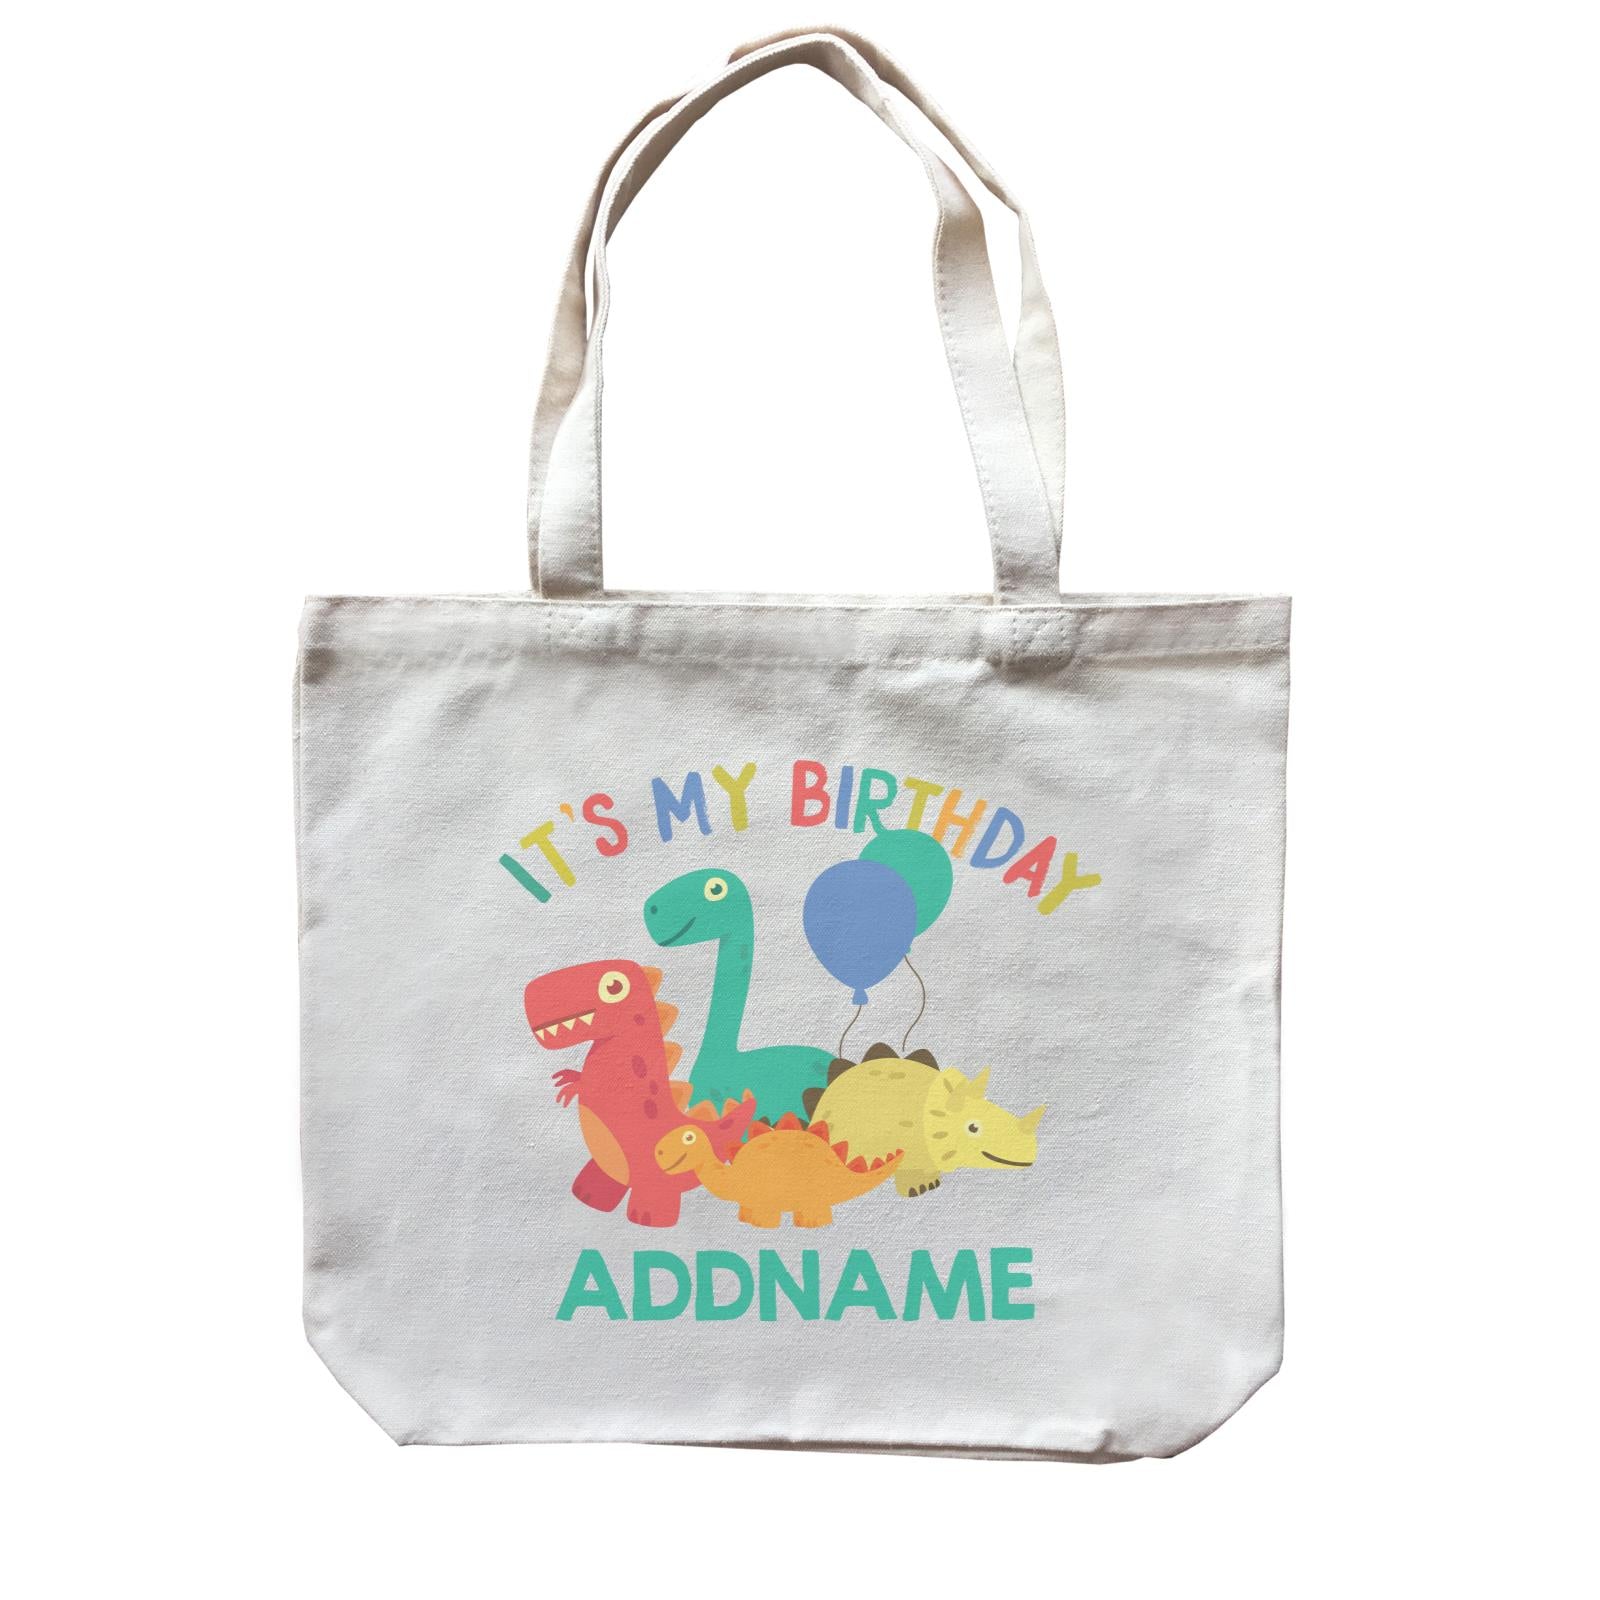 It's My Birthday Addname with Cute Dinosaurs and Balloons Birthday Theme Canvas Bag